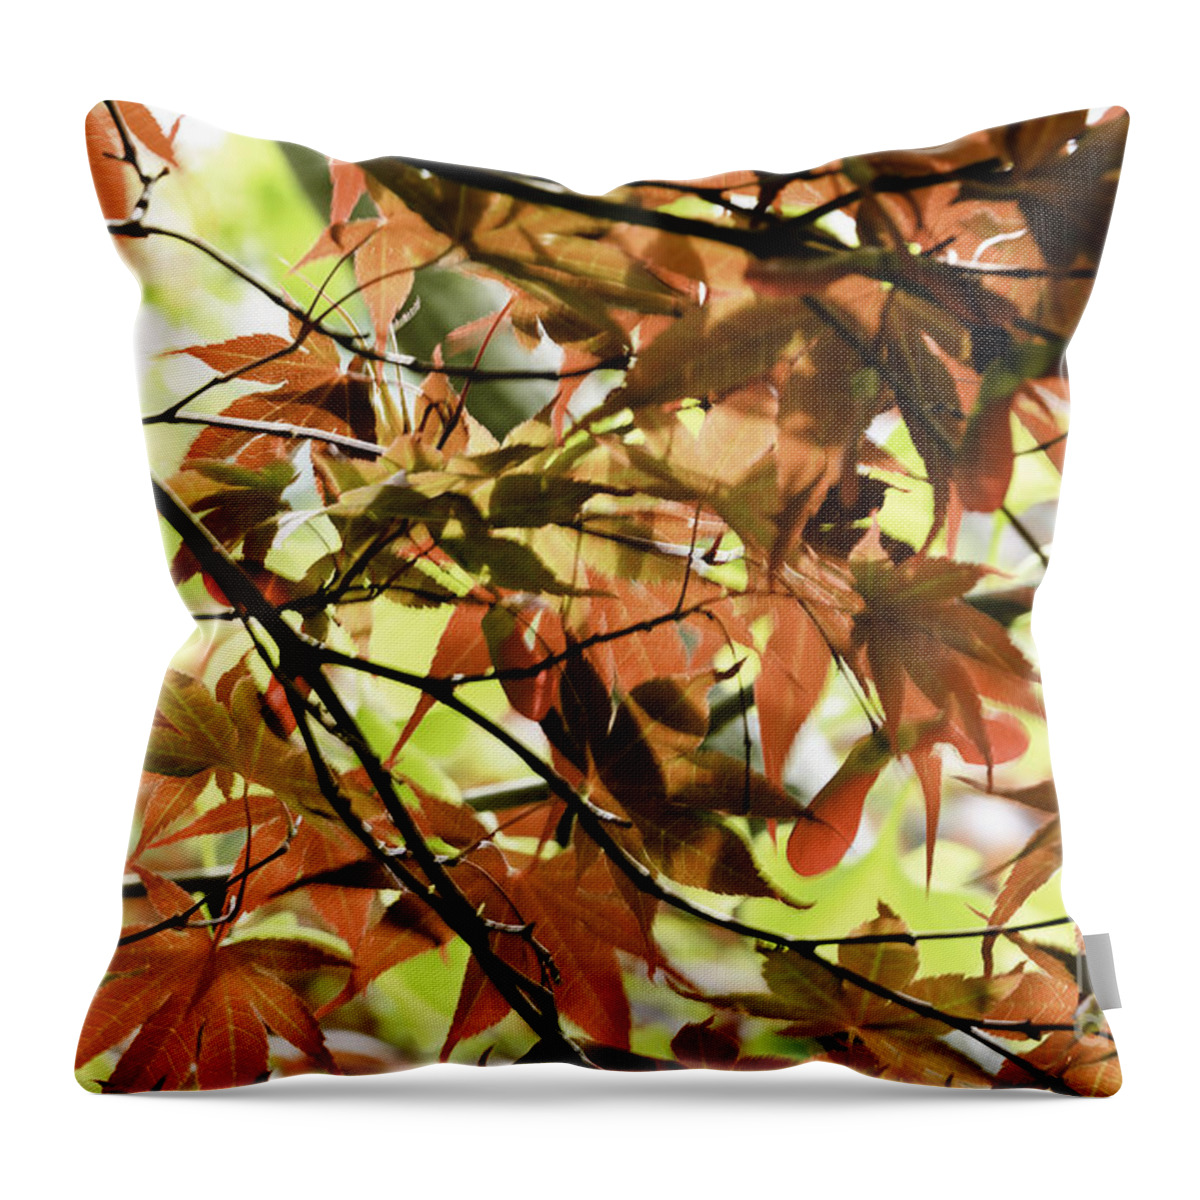 Autumn Throw Pillow featuring the photograph Autumn Leaves by Richard J Thompson 